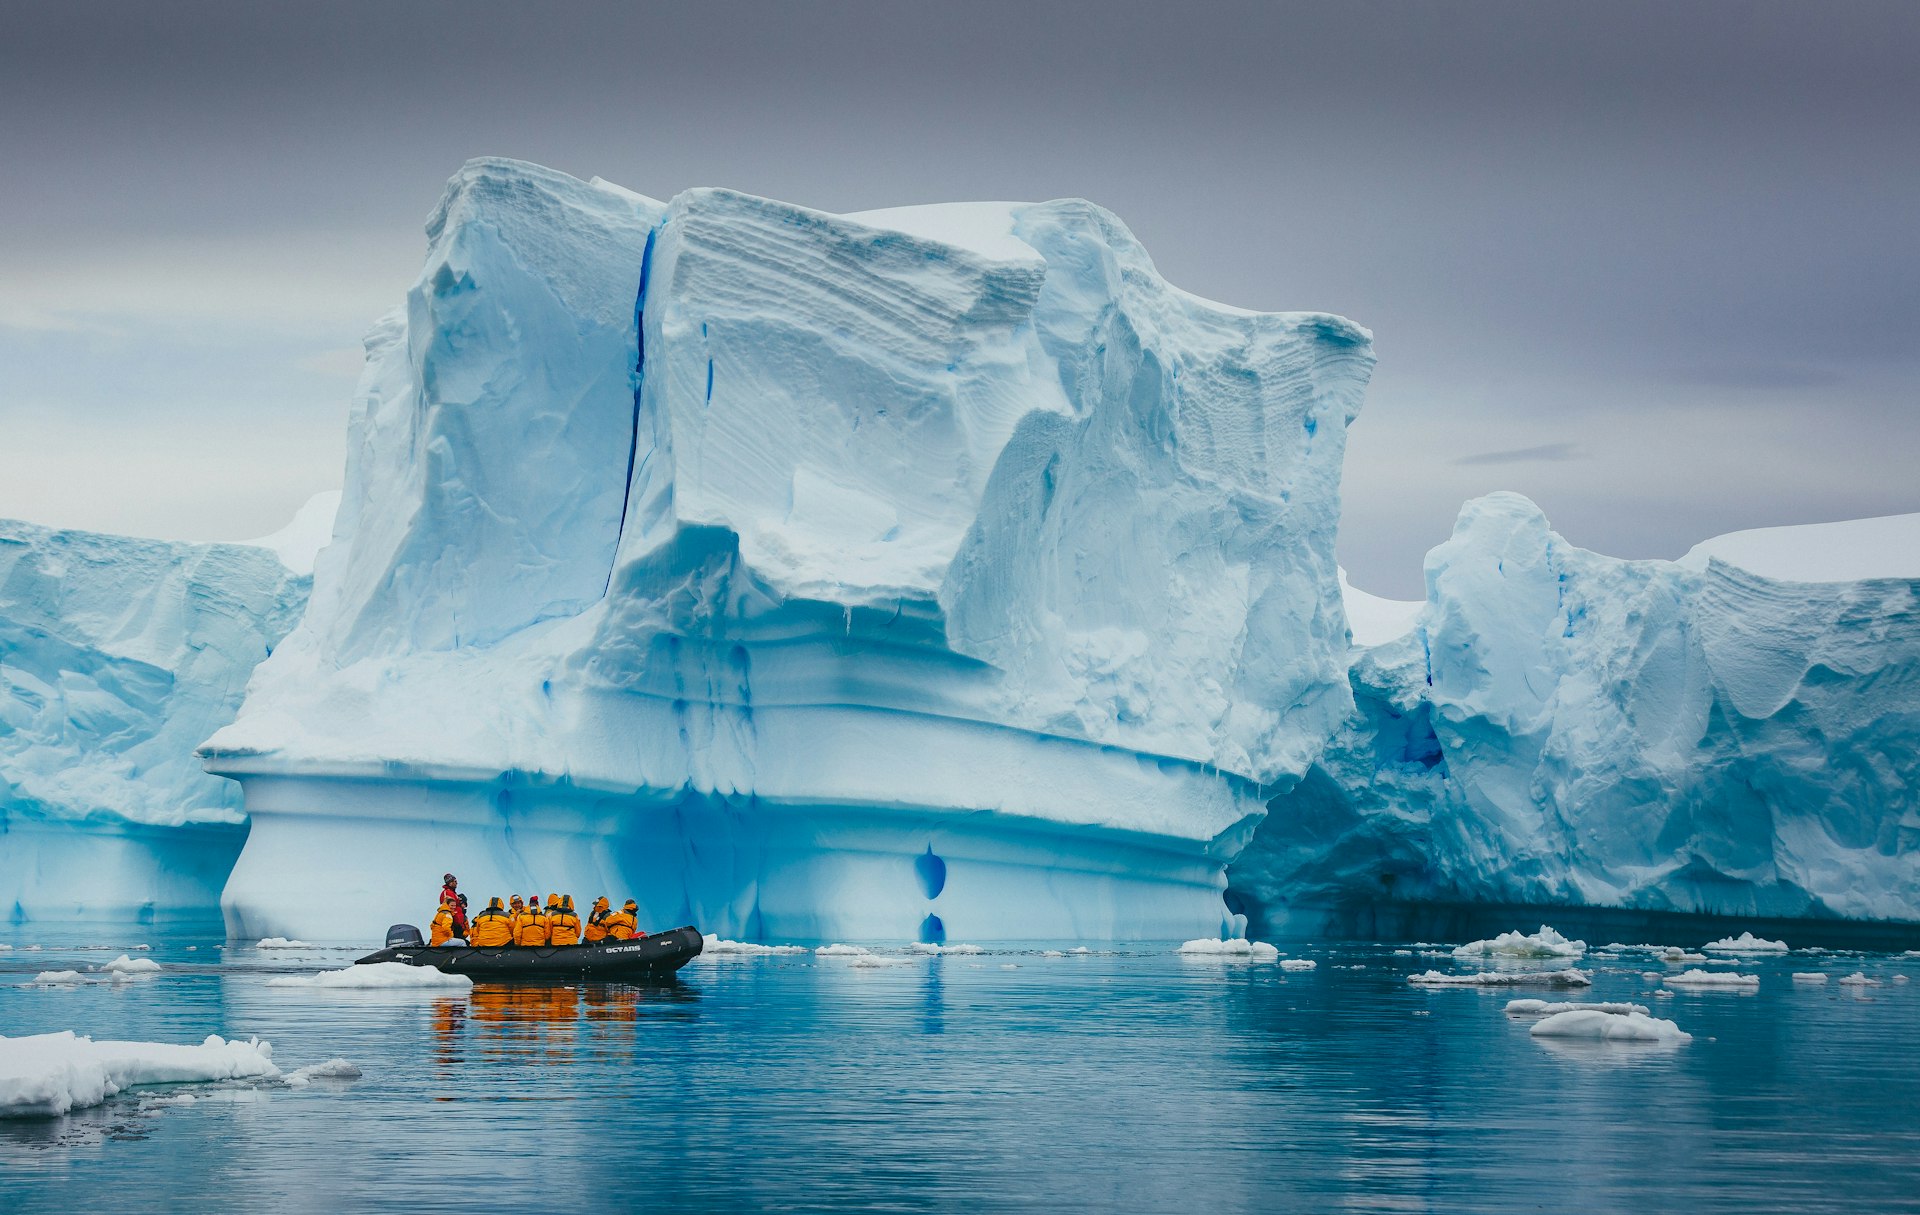 A small boat loaded with people in yellow coats pulls up alongside a large blue-white iceberg